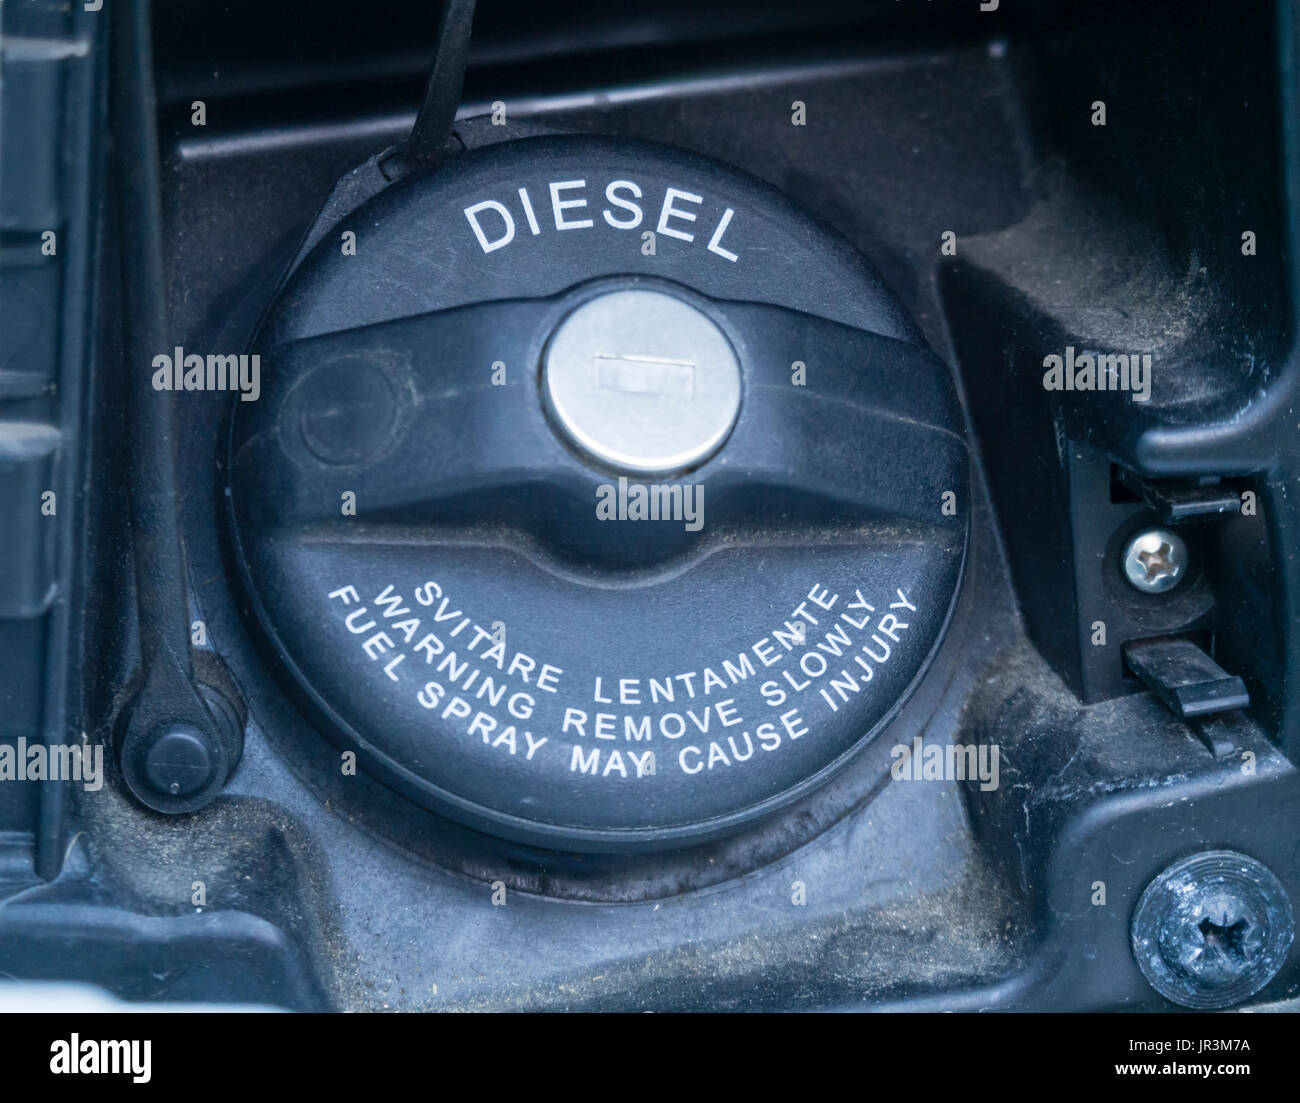 Close-up of a black plastic fuel filler cap of a diesel-powered car. Labeled 'Diesel'. Stock Photo